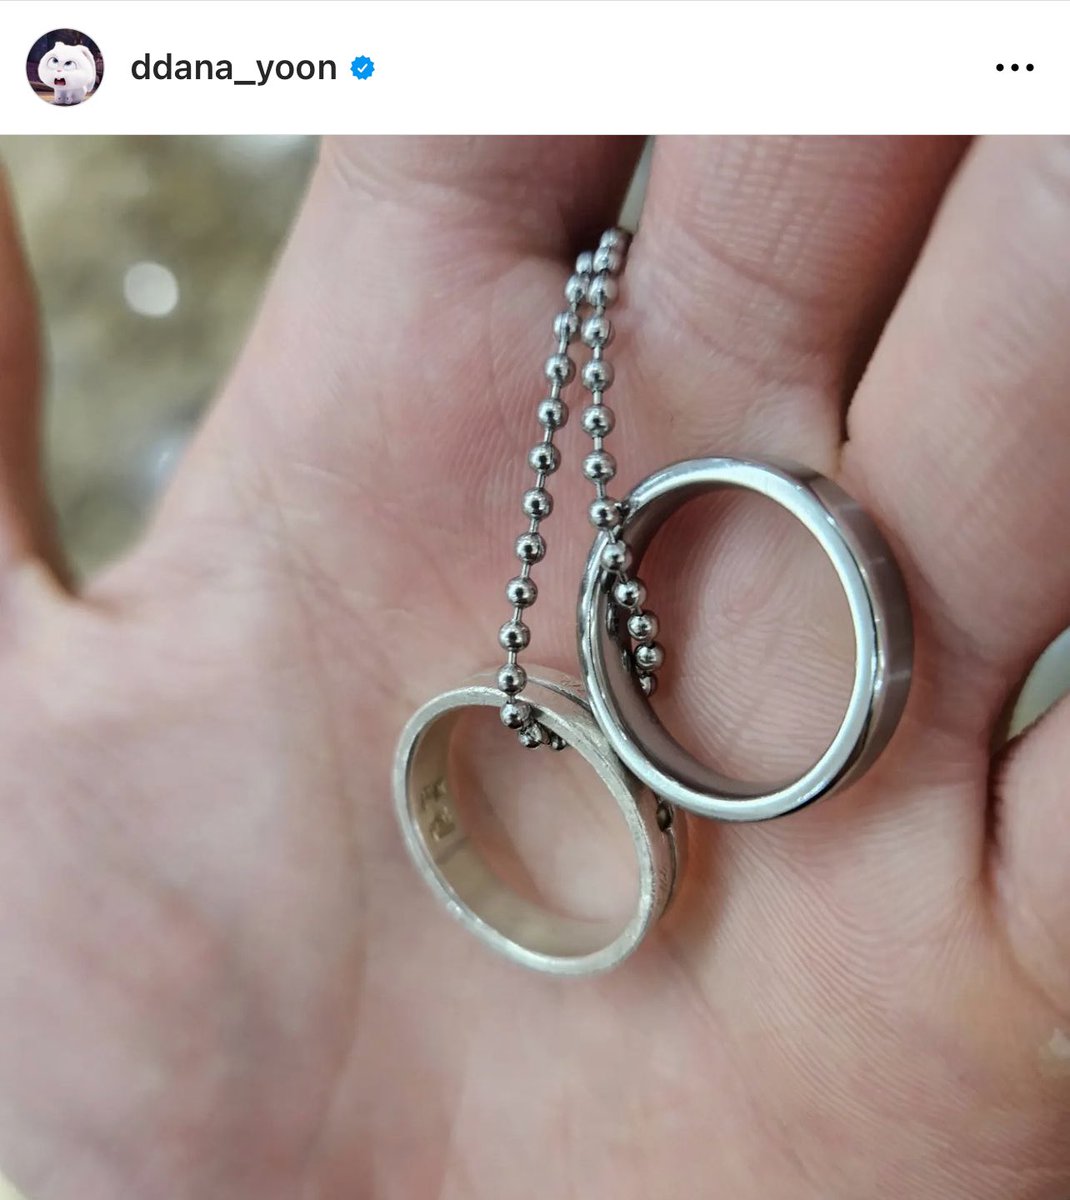 so sanha is the one who got to keep moonbins friendship ring and it seems like he put it in a necklace to keep close to his heart just like moonbin would :(